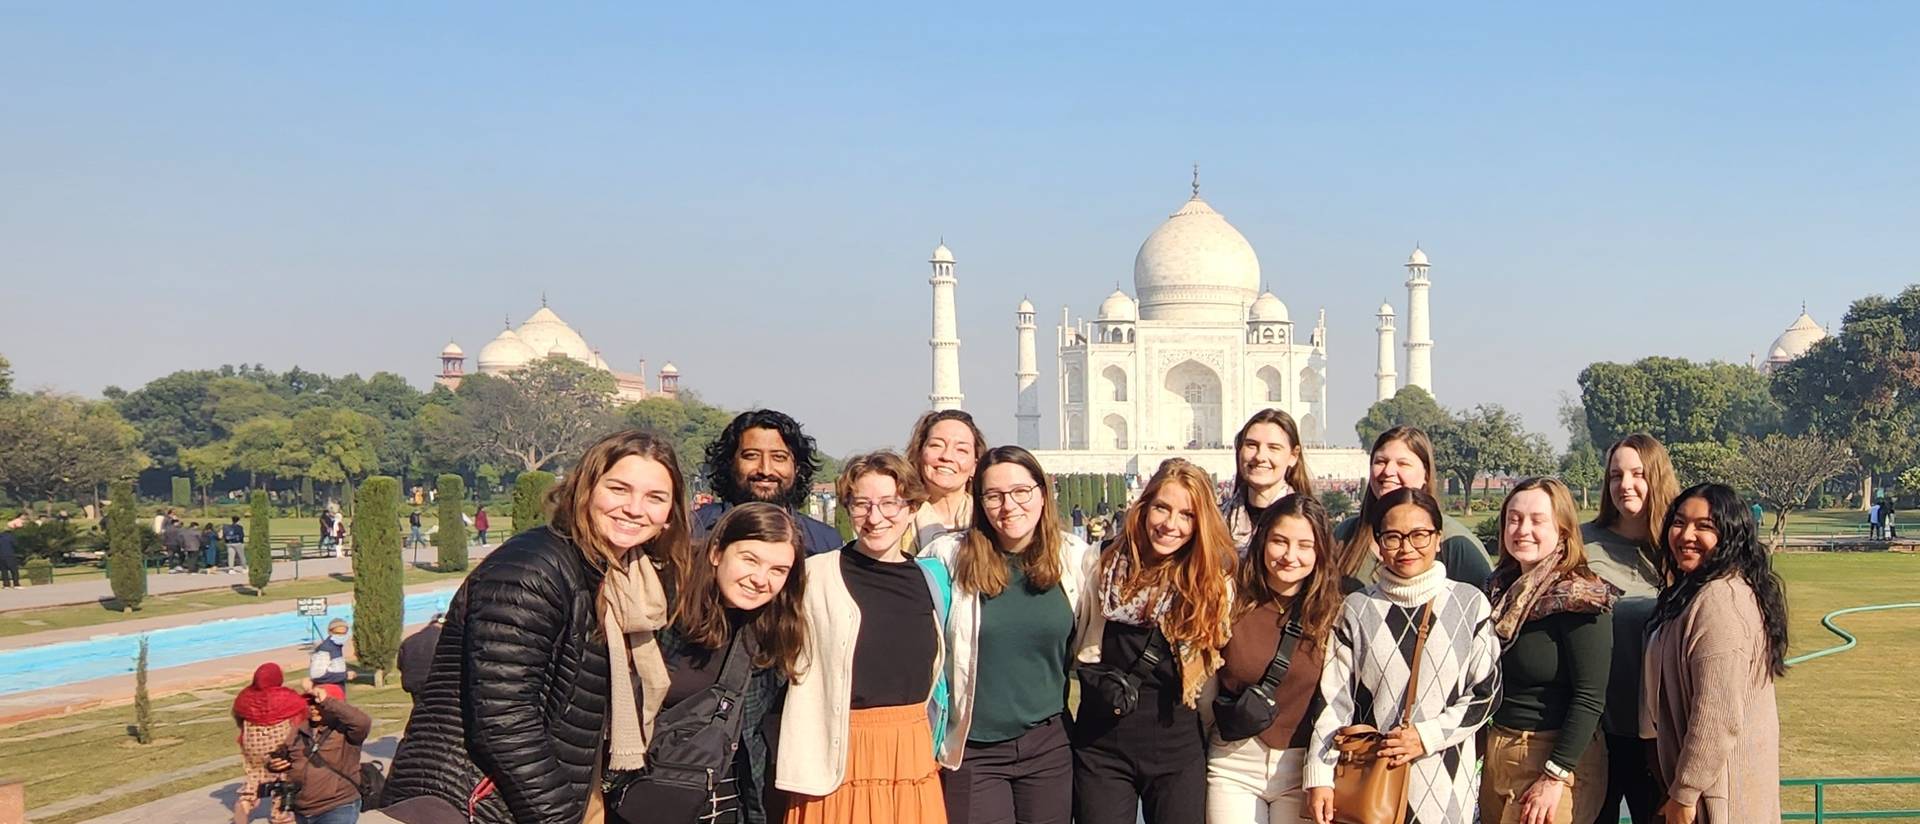 REGSS students pose in front of the Taj Mahal.